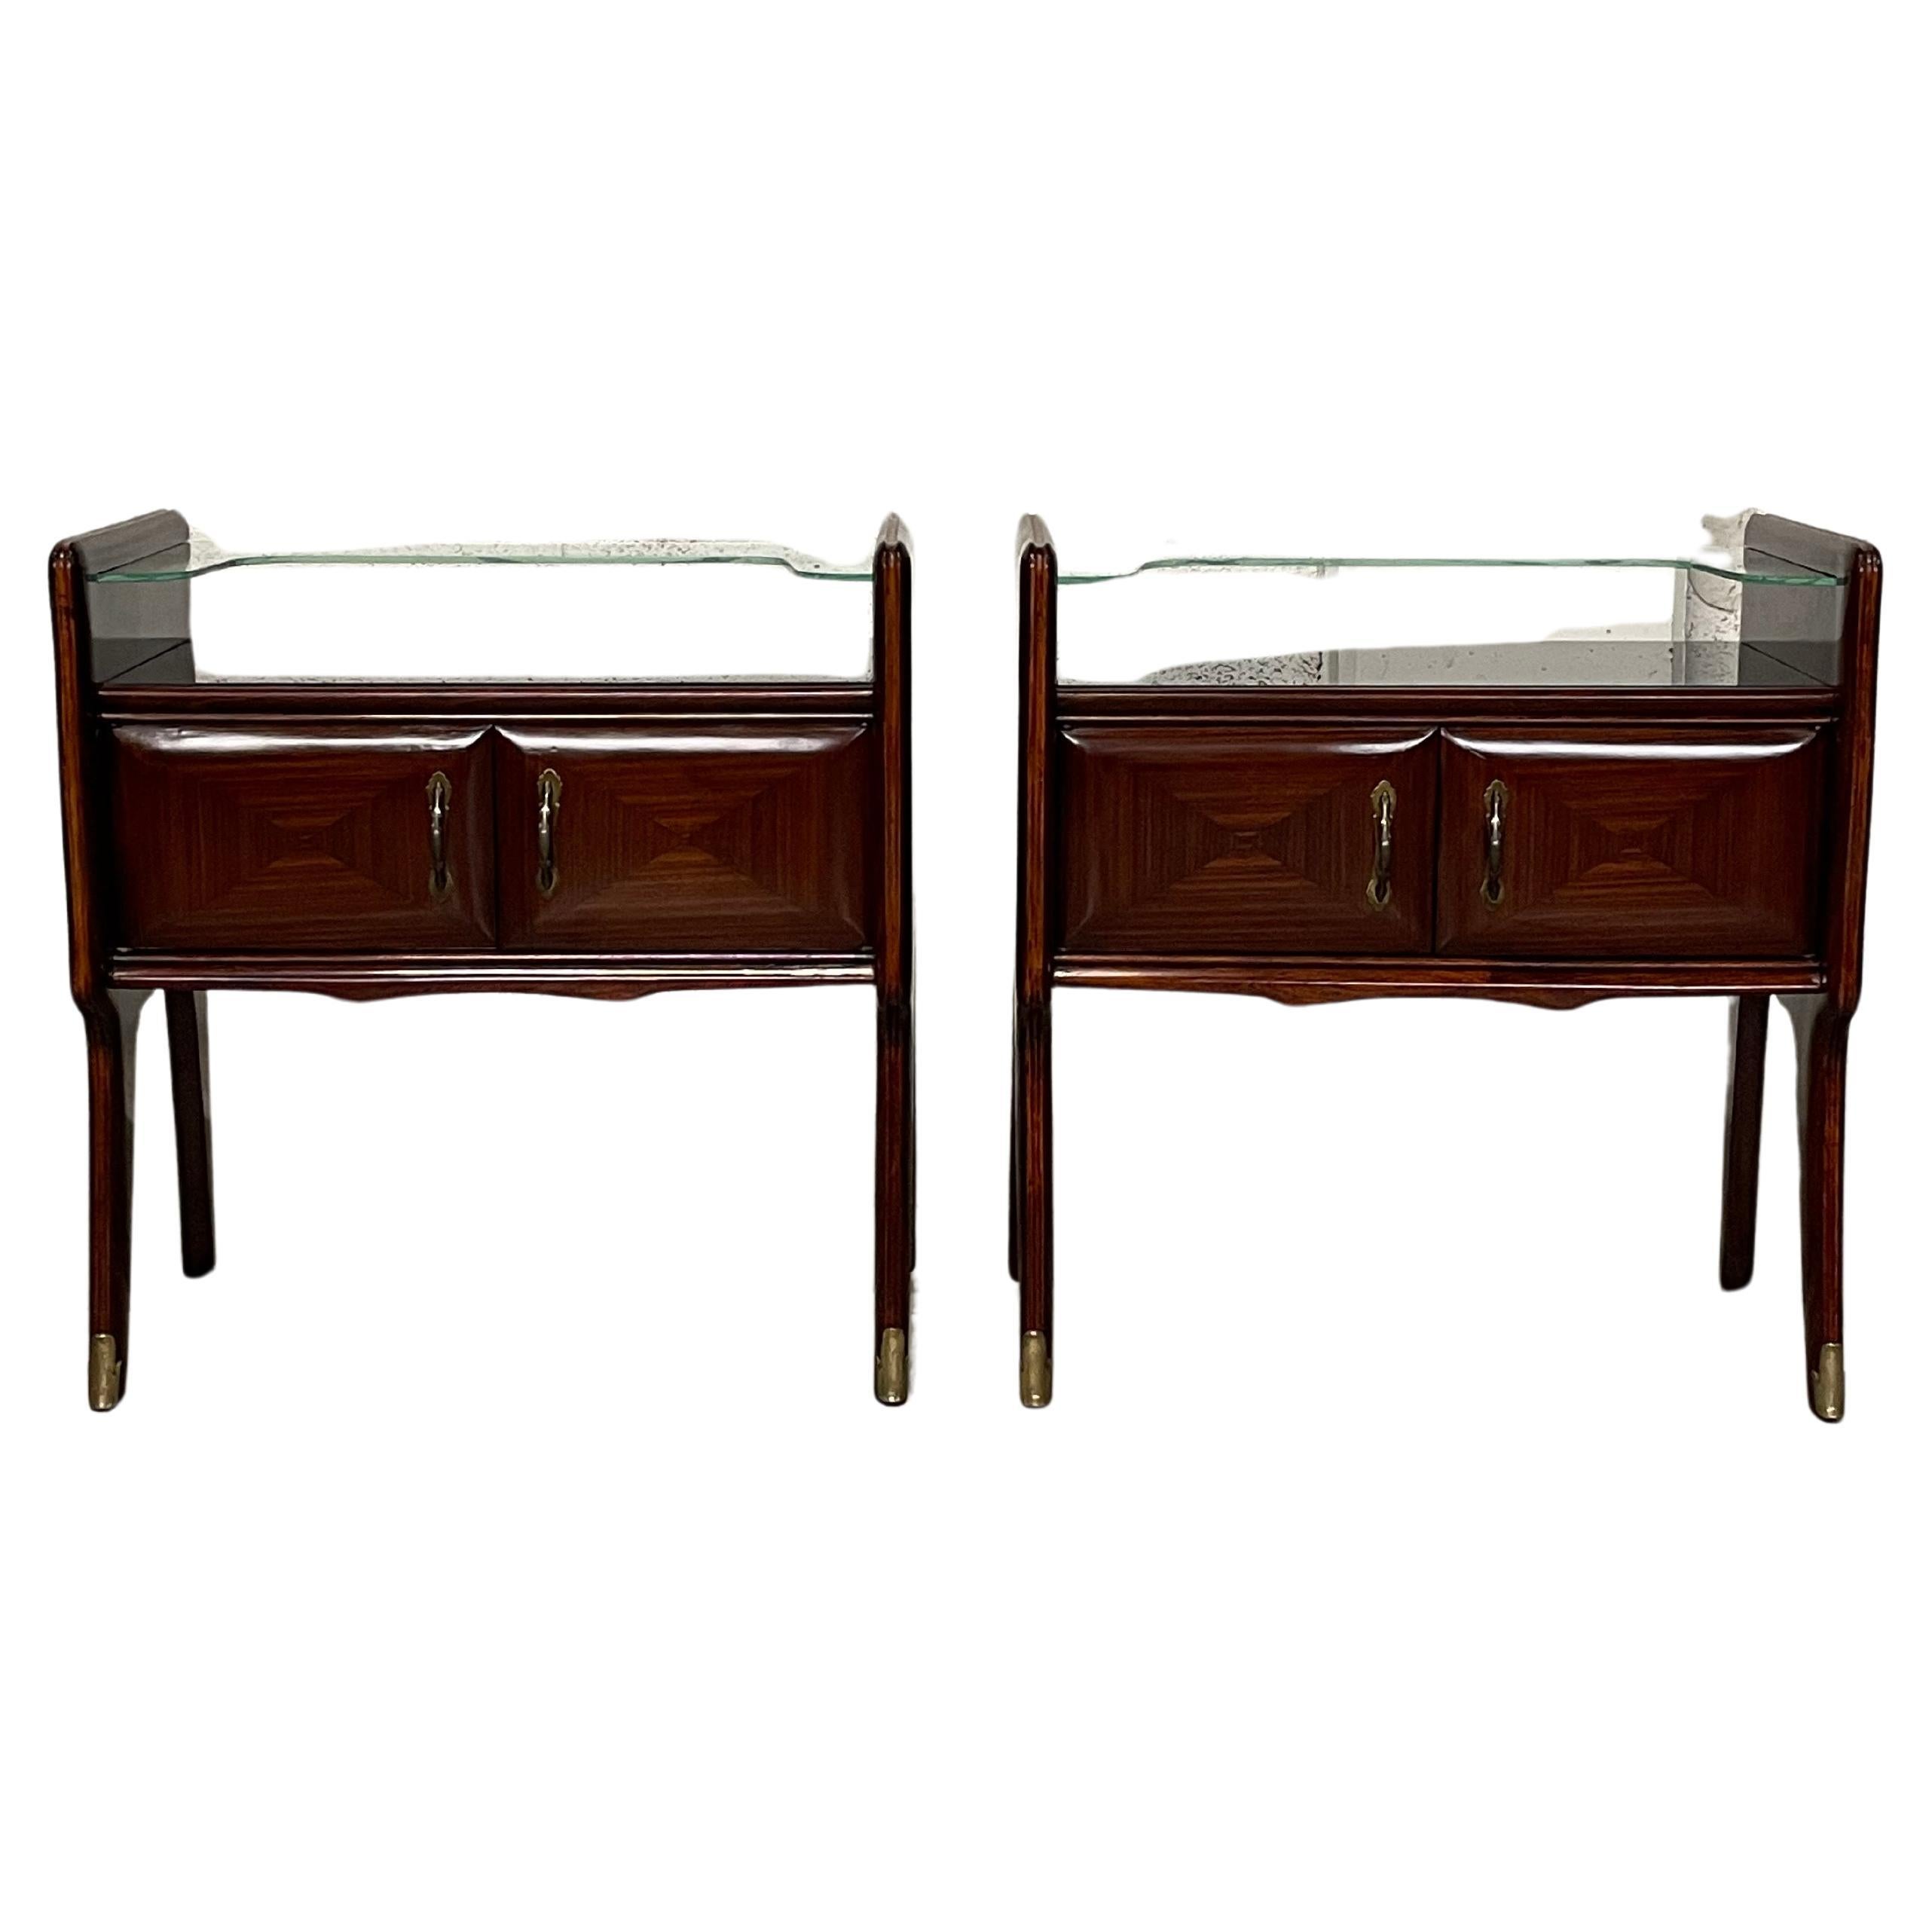 Pair of mahogany and glass bedside tables from the 1950s